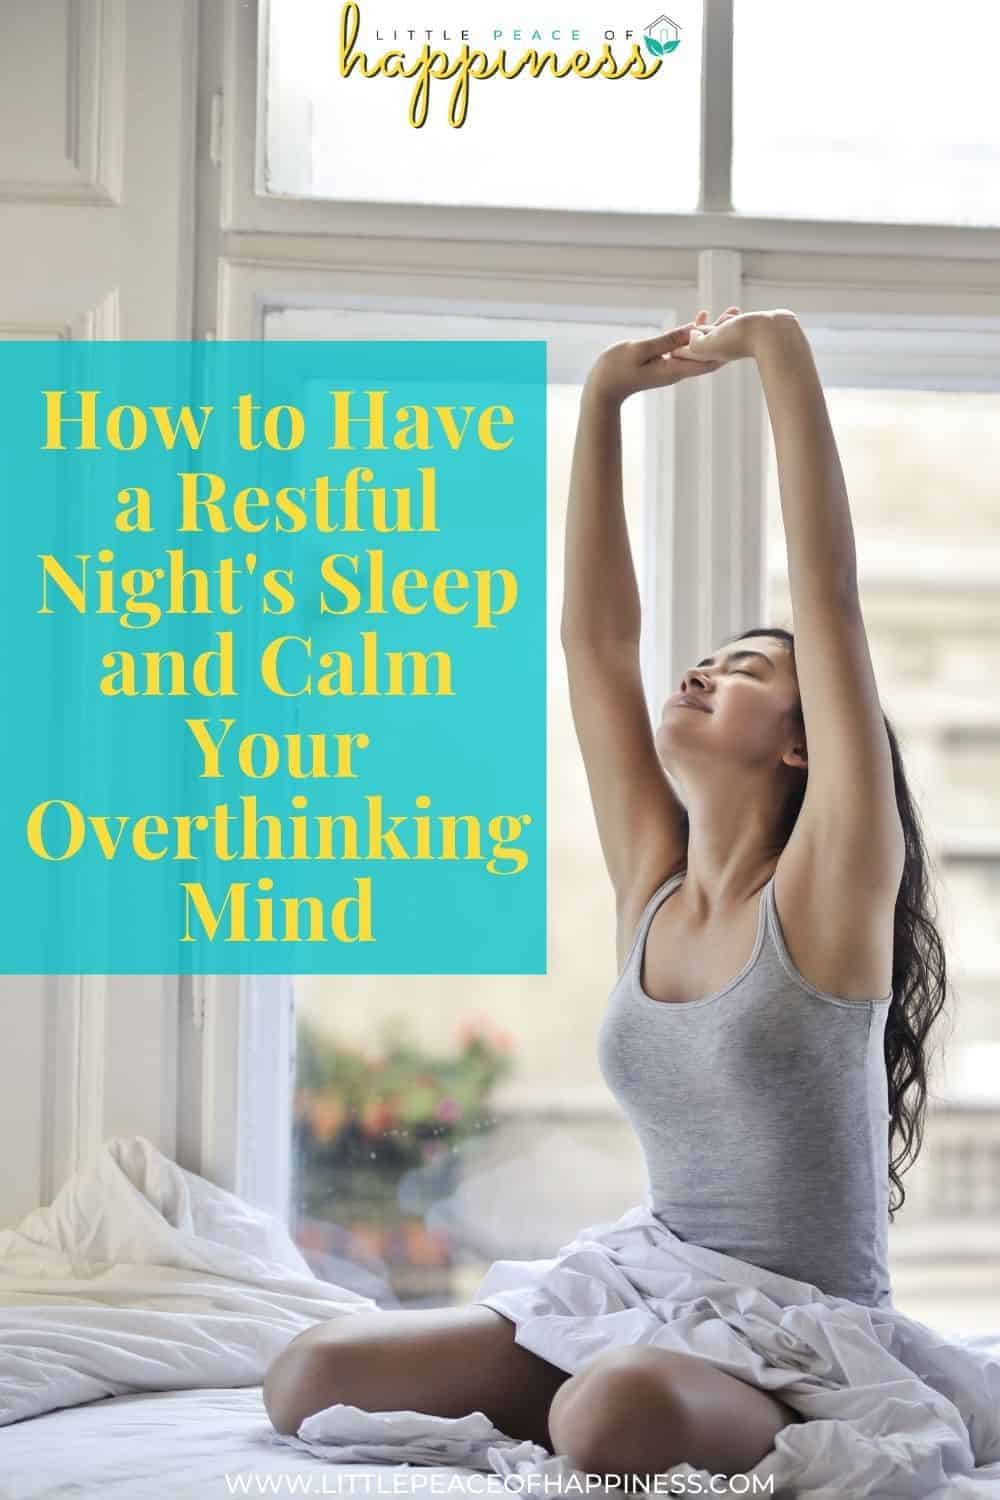 how to have a restful night's sleep and calm your overthinking mind